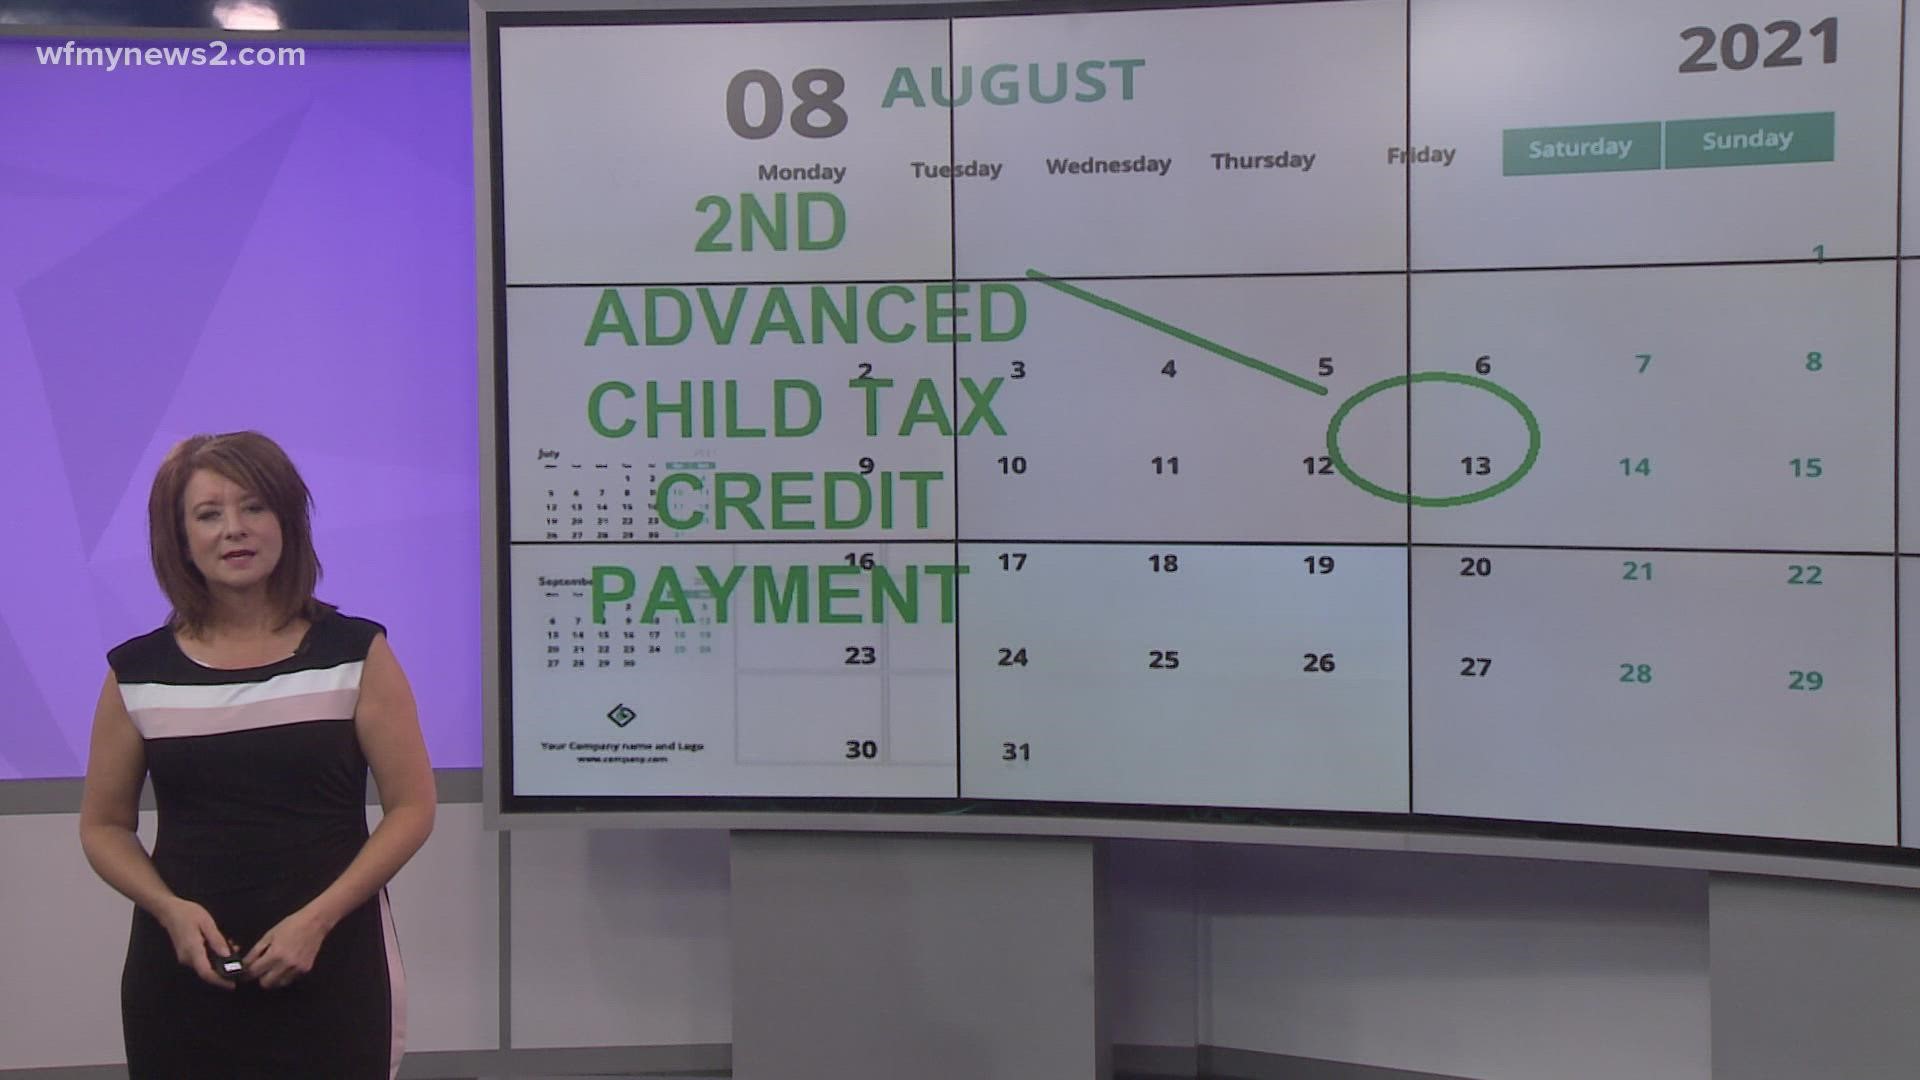 Child Tax Credit checks were supposed to come in several days ago, so what's behind the delay?